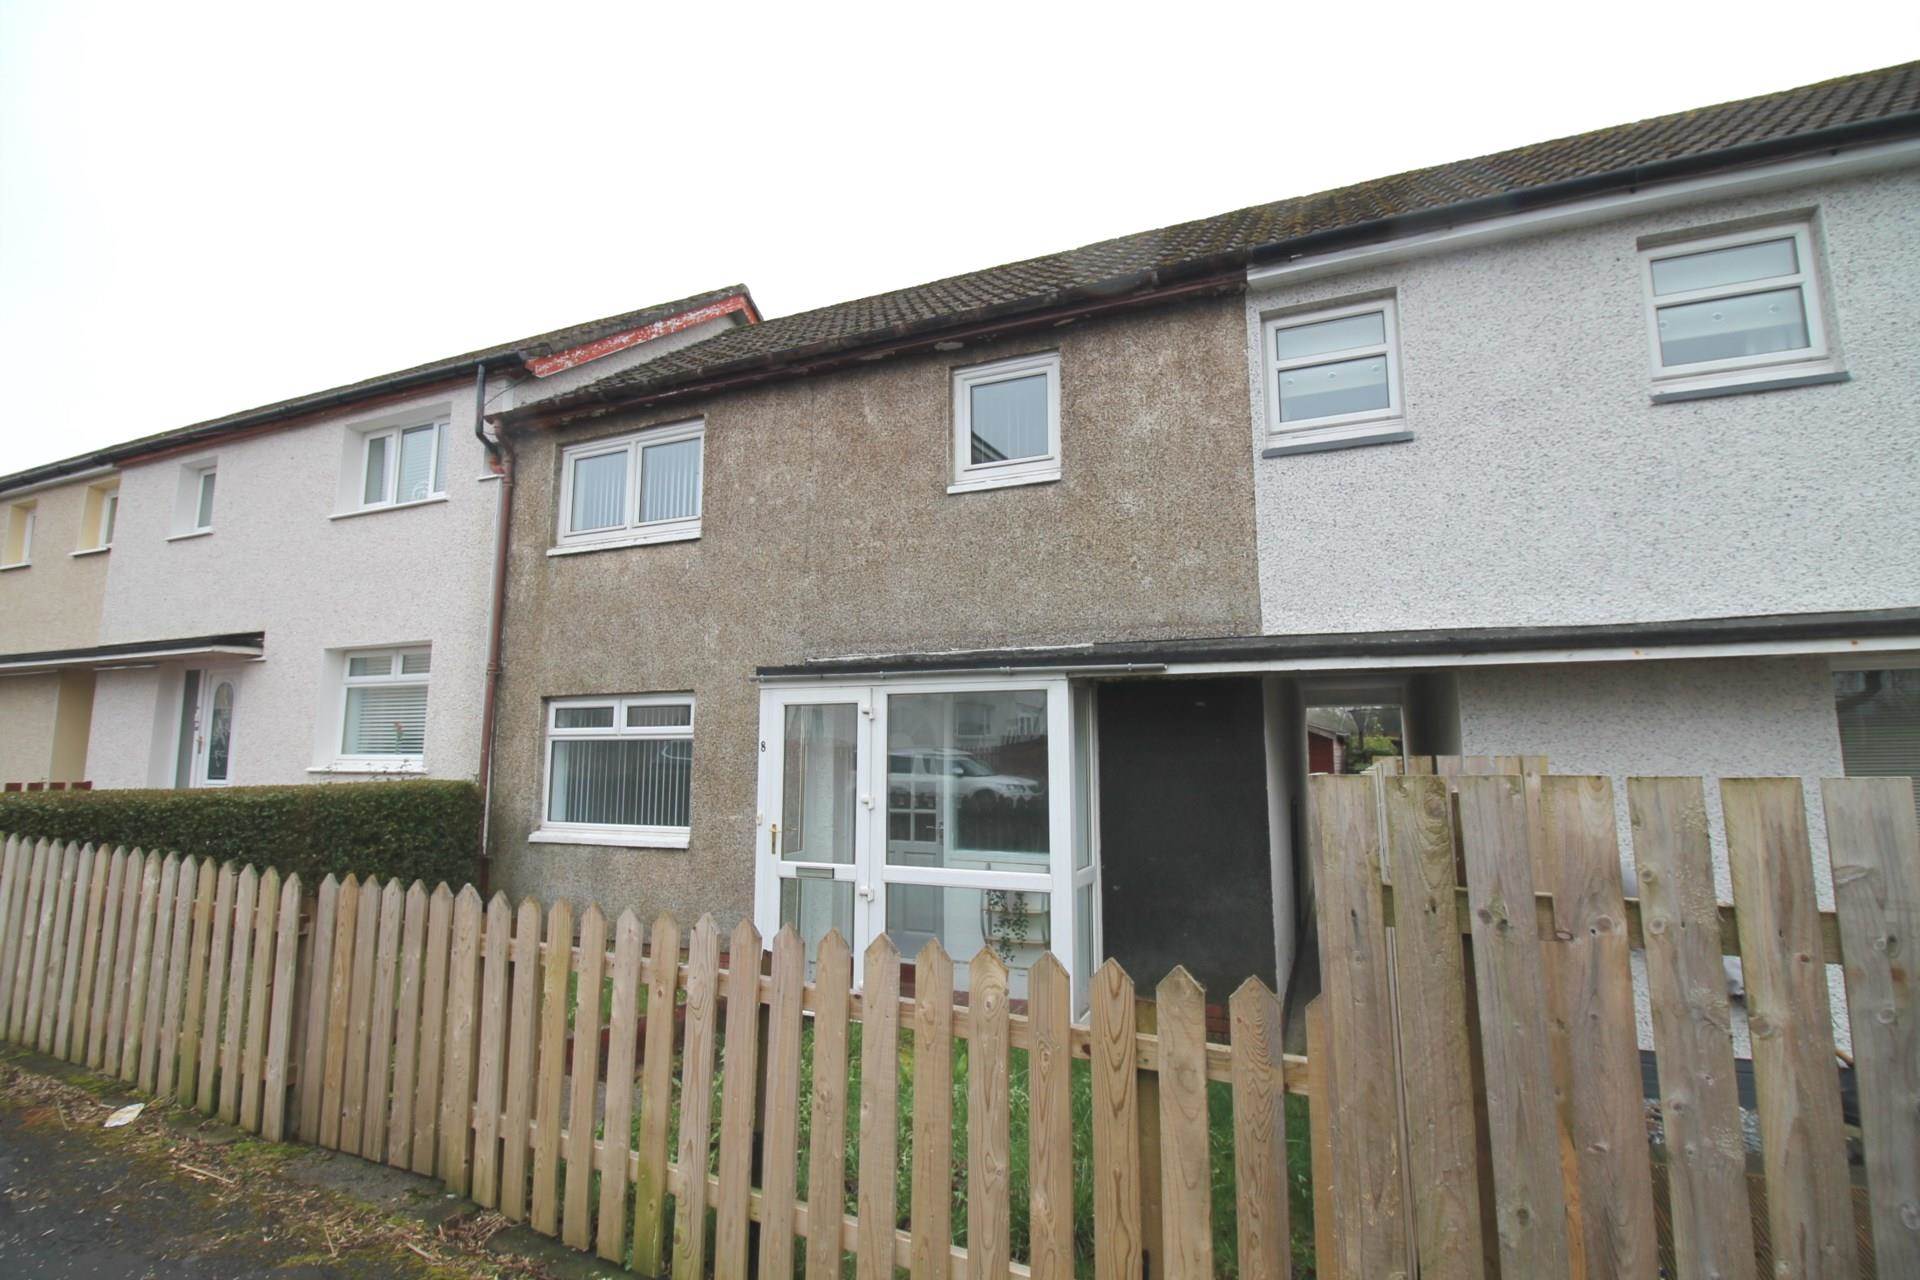 2 bed House (unspecified) for rent in Linwood. From LM Properties